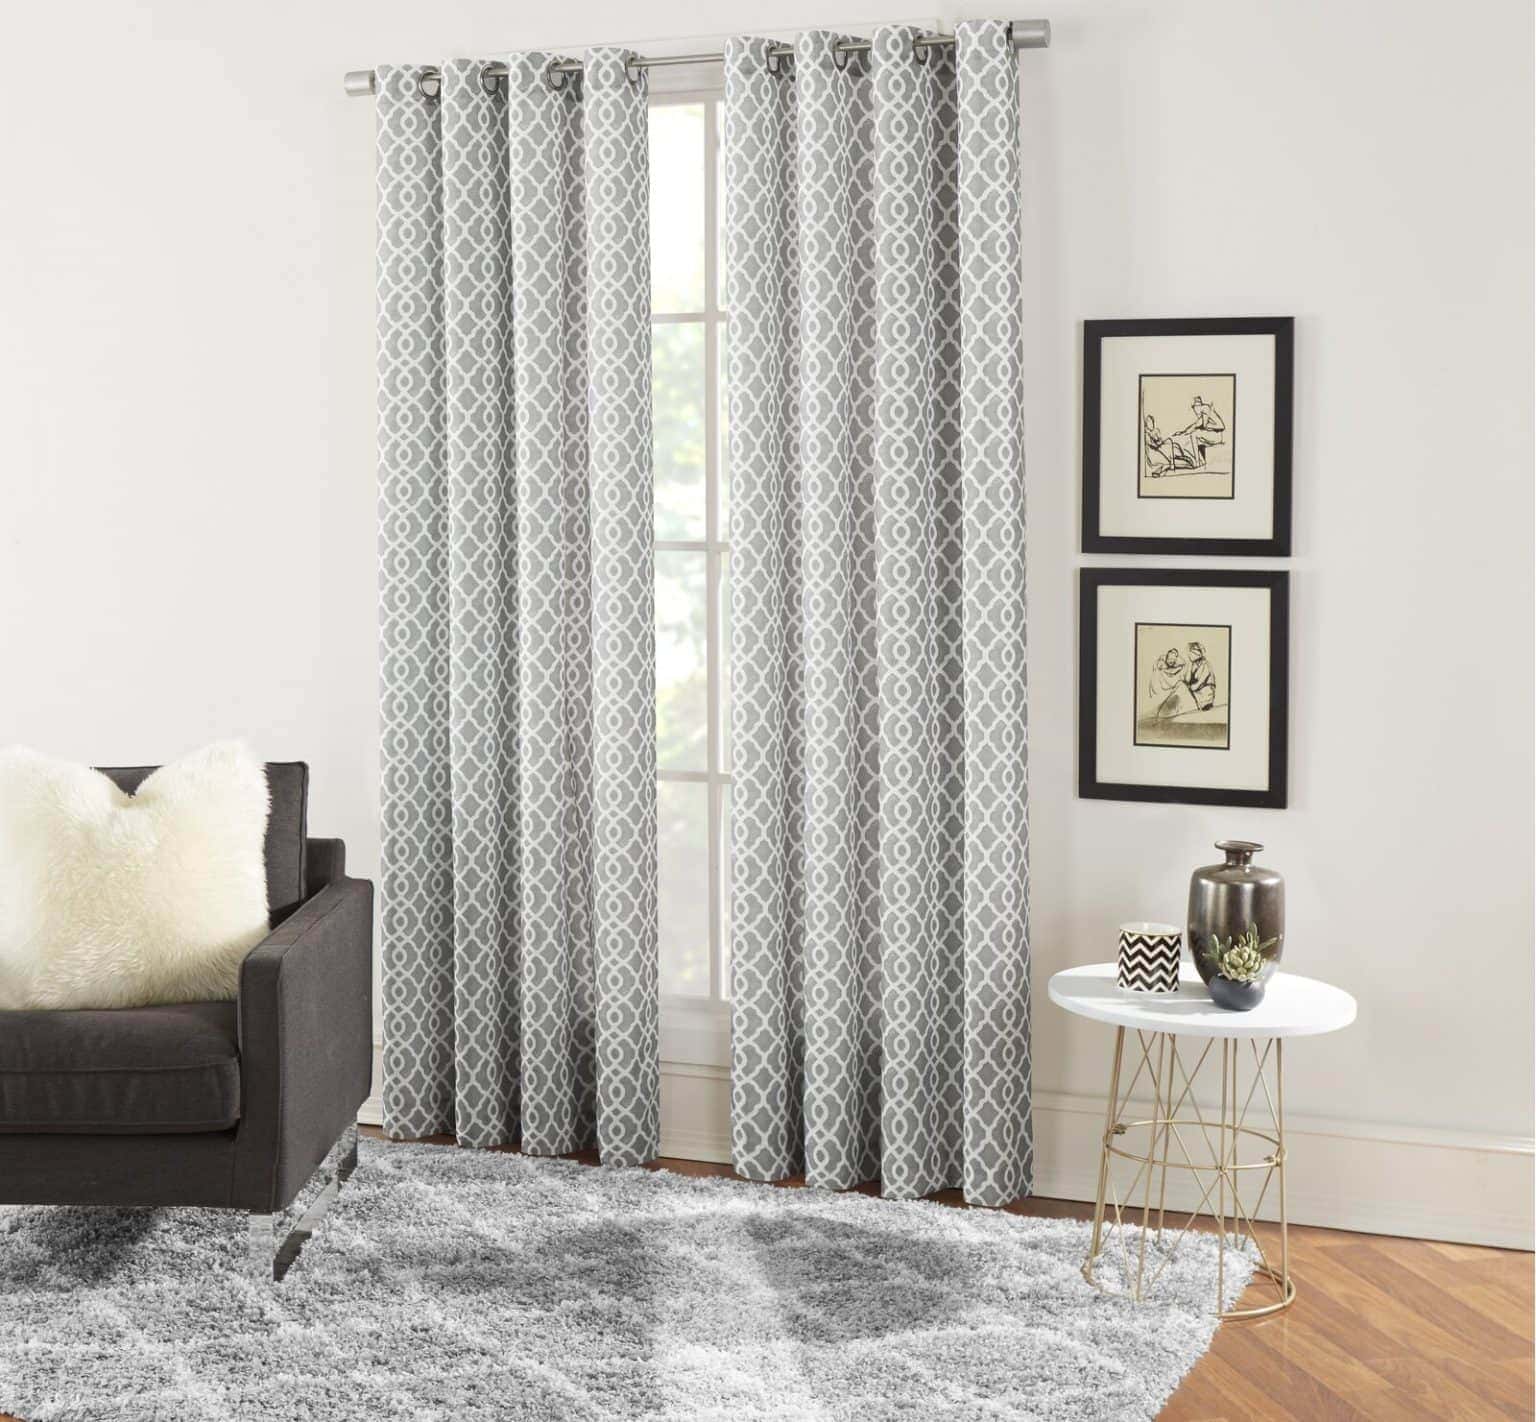 9 Light Grey Patterned Curtains For A Simple Chic Look 1536x1422 